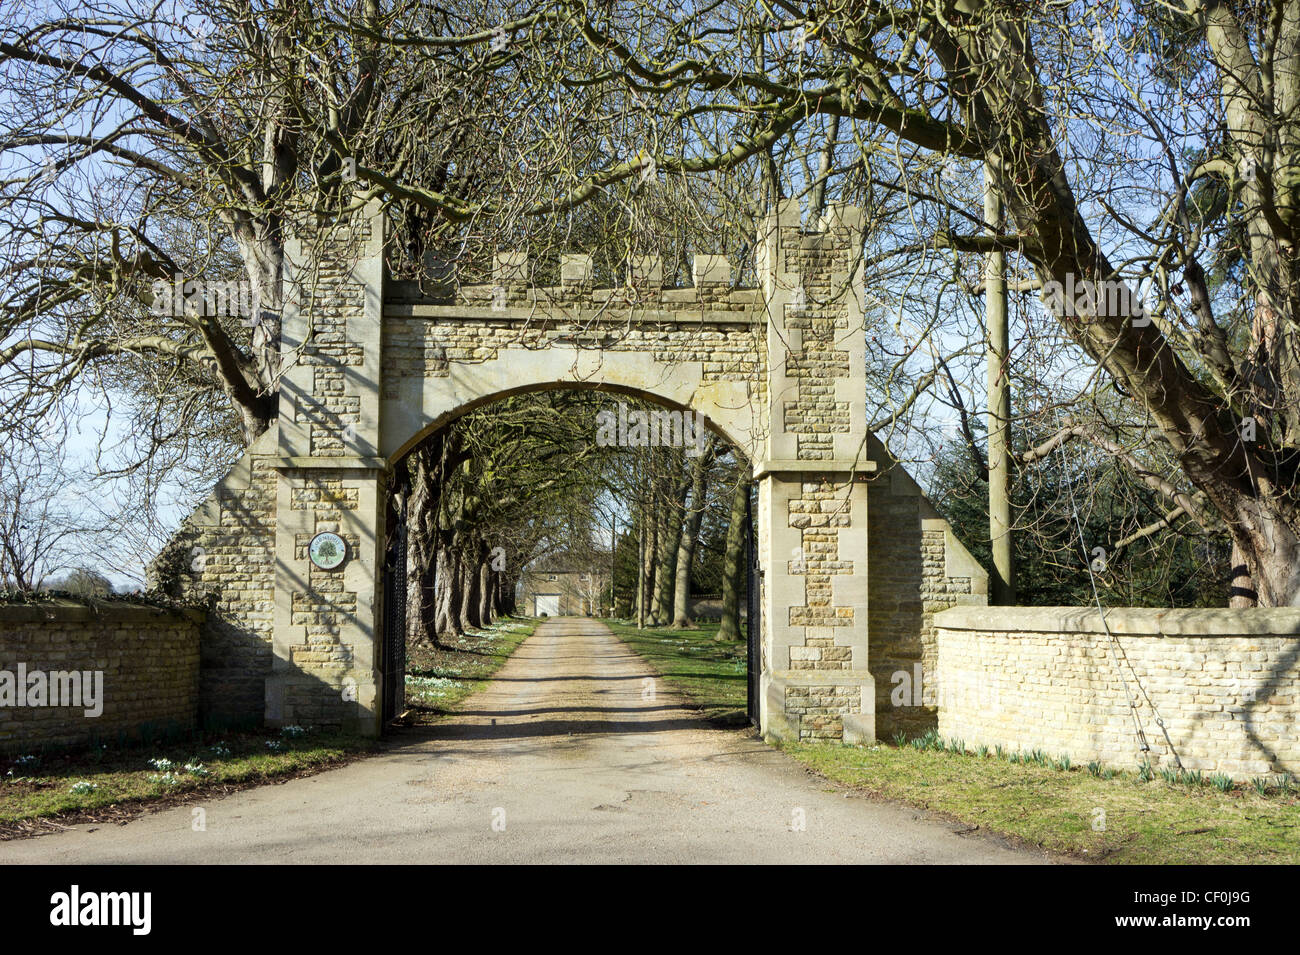 Arched gateway and drive in rural Northamptonshire, England. Stock Photo